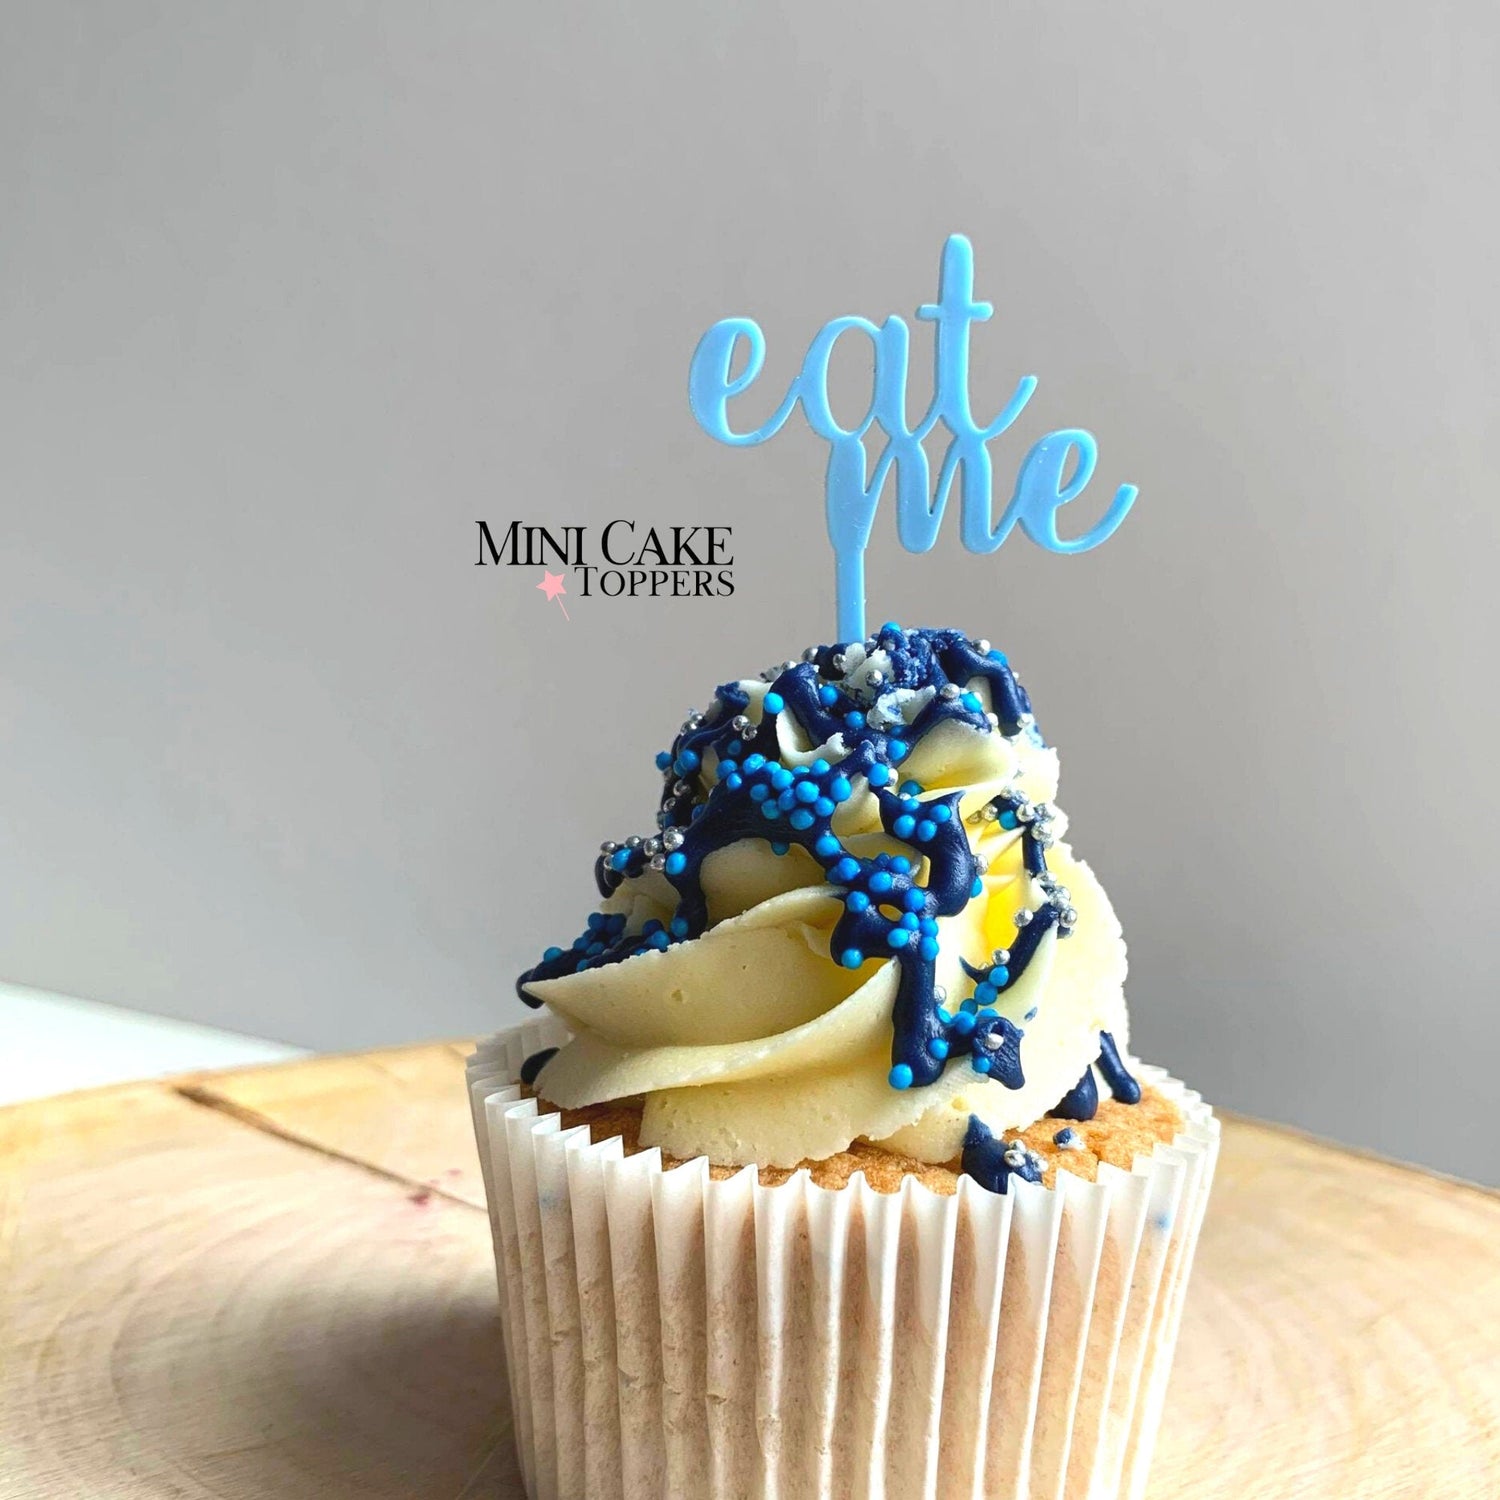 Eat Me Cupcake Toppers - Cake Topper Warehouse